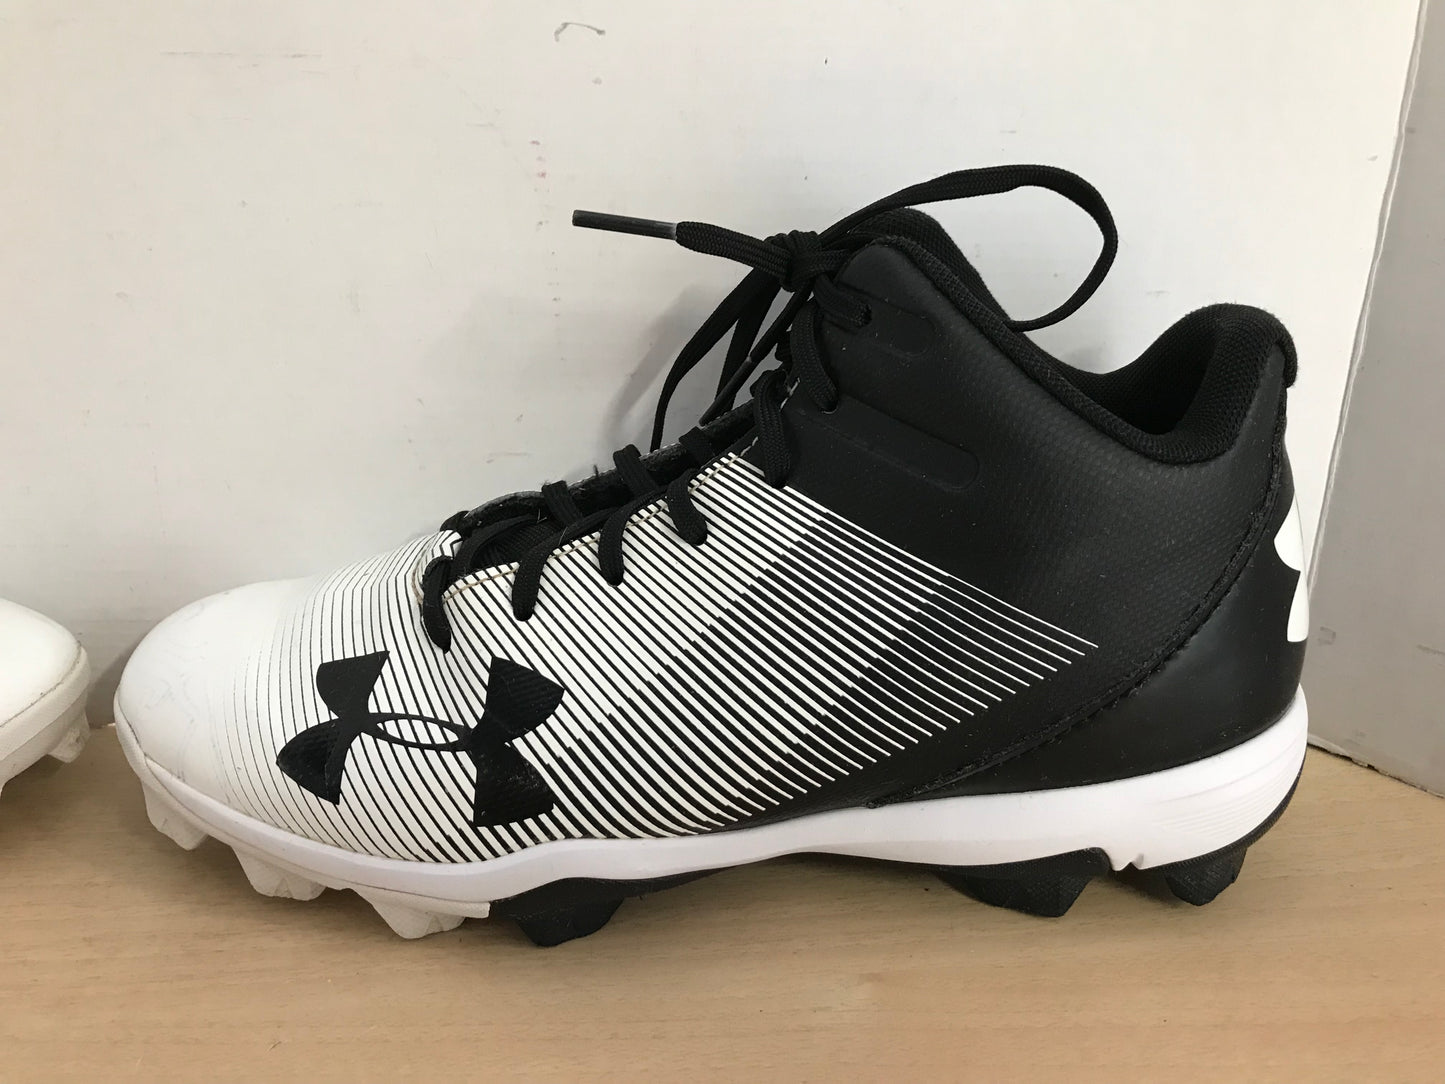 Baseball Shoes Cleats Child Size 6 Youth Under Armour Black White Minor Mark